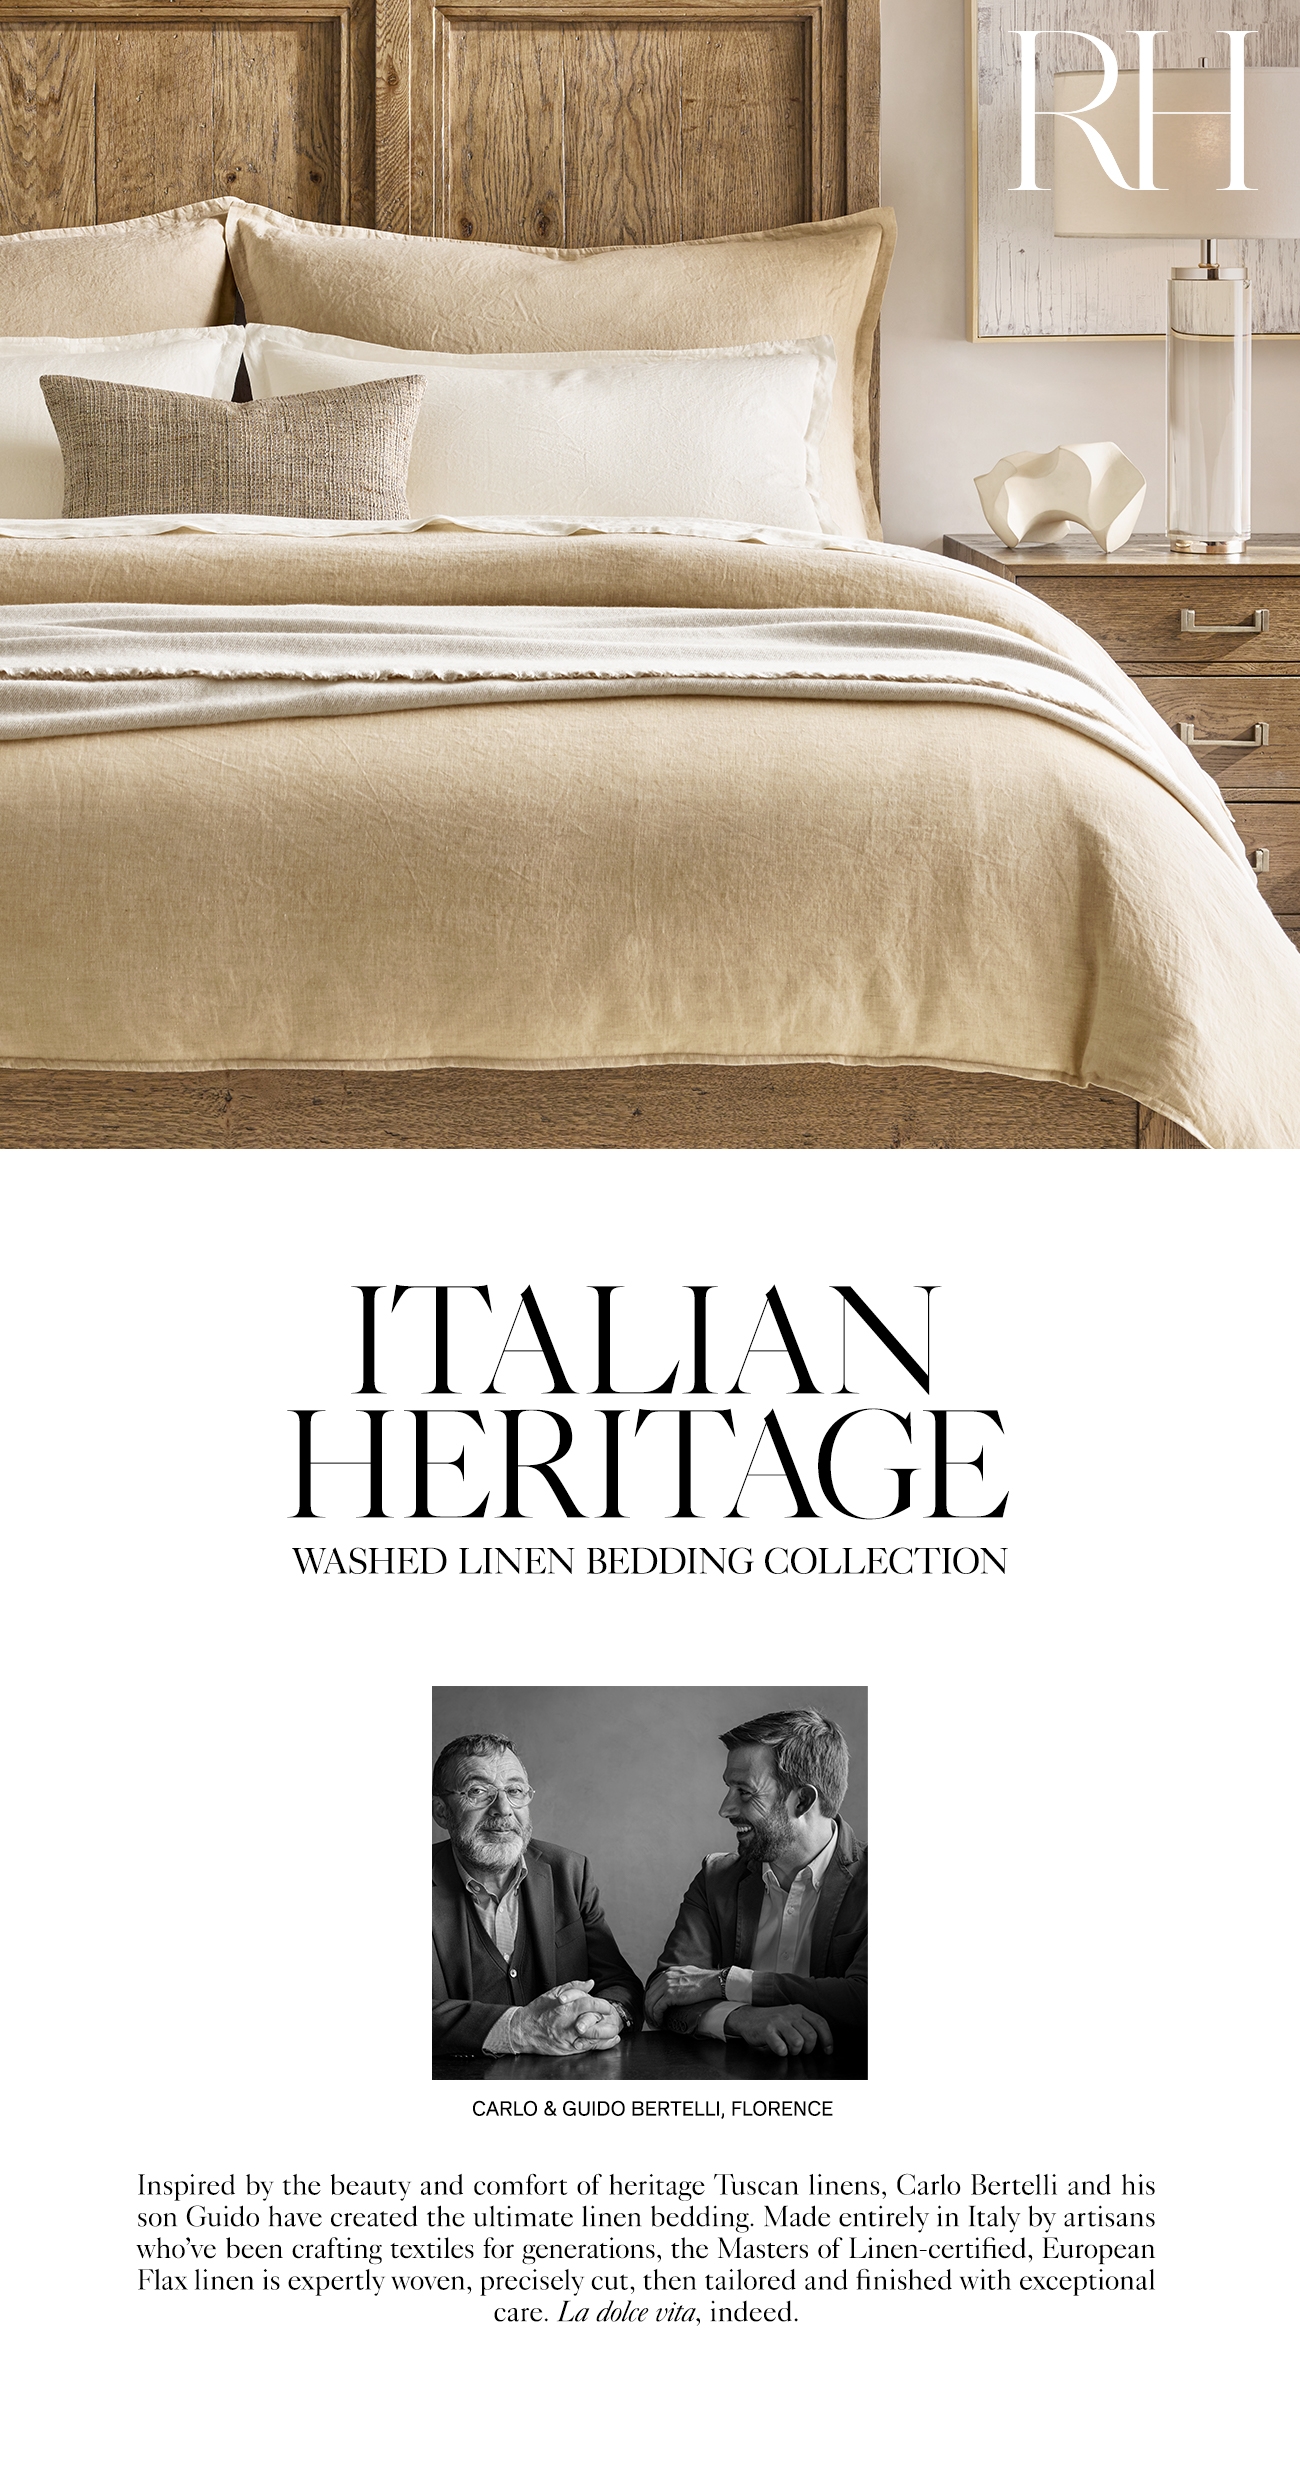  IEALIAN HERITAGL WASHED LINEN BEDDING COLLECTION CARLO GUIDO BERTELLI, FLORENCE Inspired by the beauty and comfort of heritage Tuscan linens, Carlo Bertelli and his son Guido have created the ultimate linen bedding. Made entirely in Italy by artisans who've been crafting textiles for generations, the Masters of Linen-certified, European Flax linen is expertly woven, precisely cut, then tailored and finished with exceptional care. La dolce vita, indeed. 